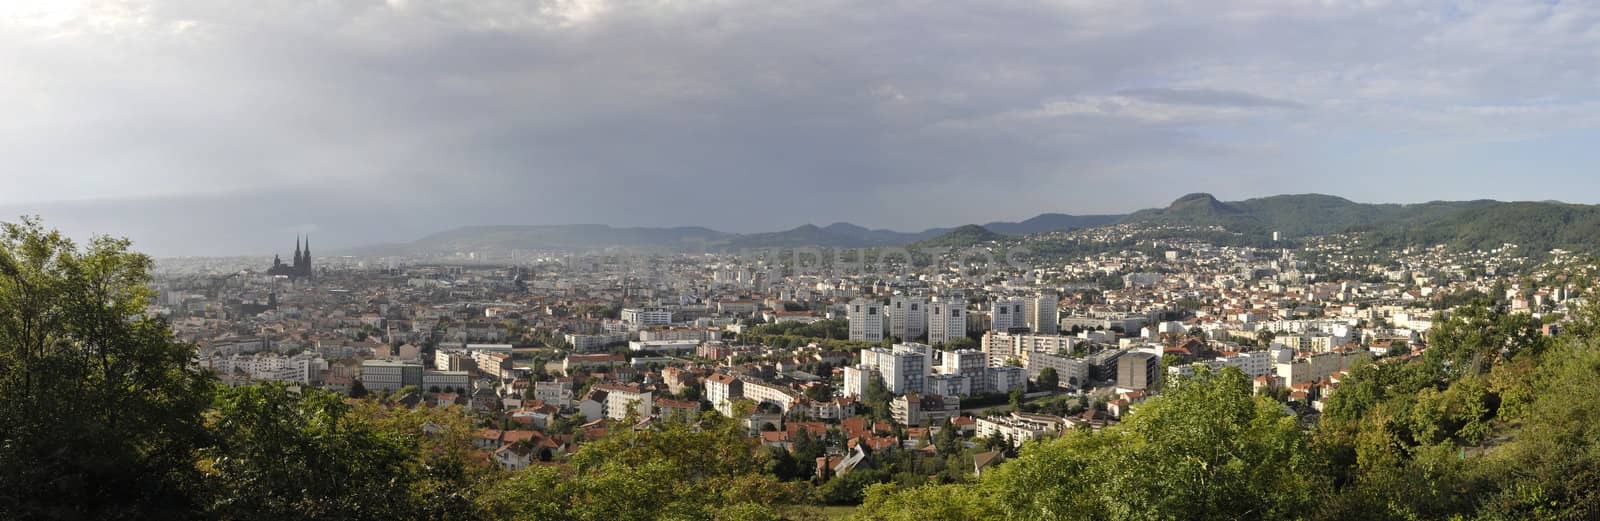 Panoramic View of Clermont-Ferrand City with a Cloudy Sky